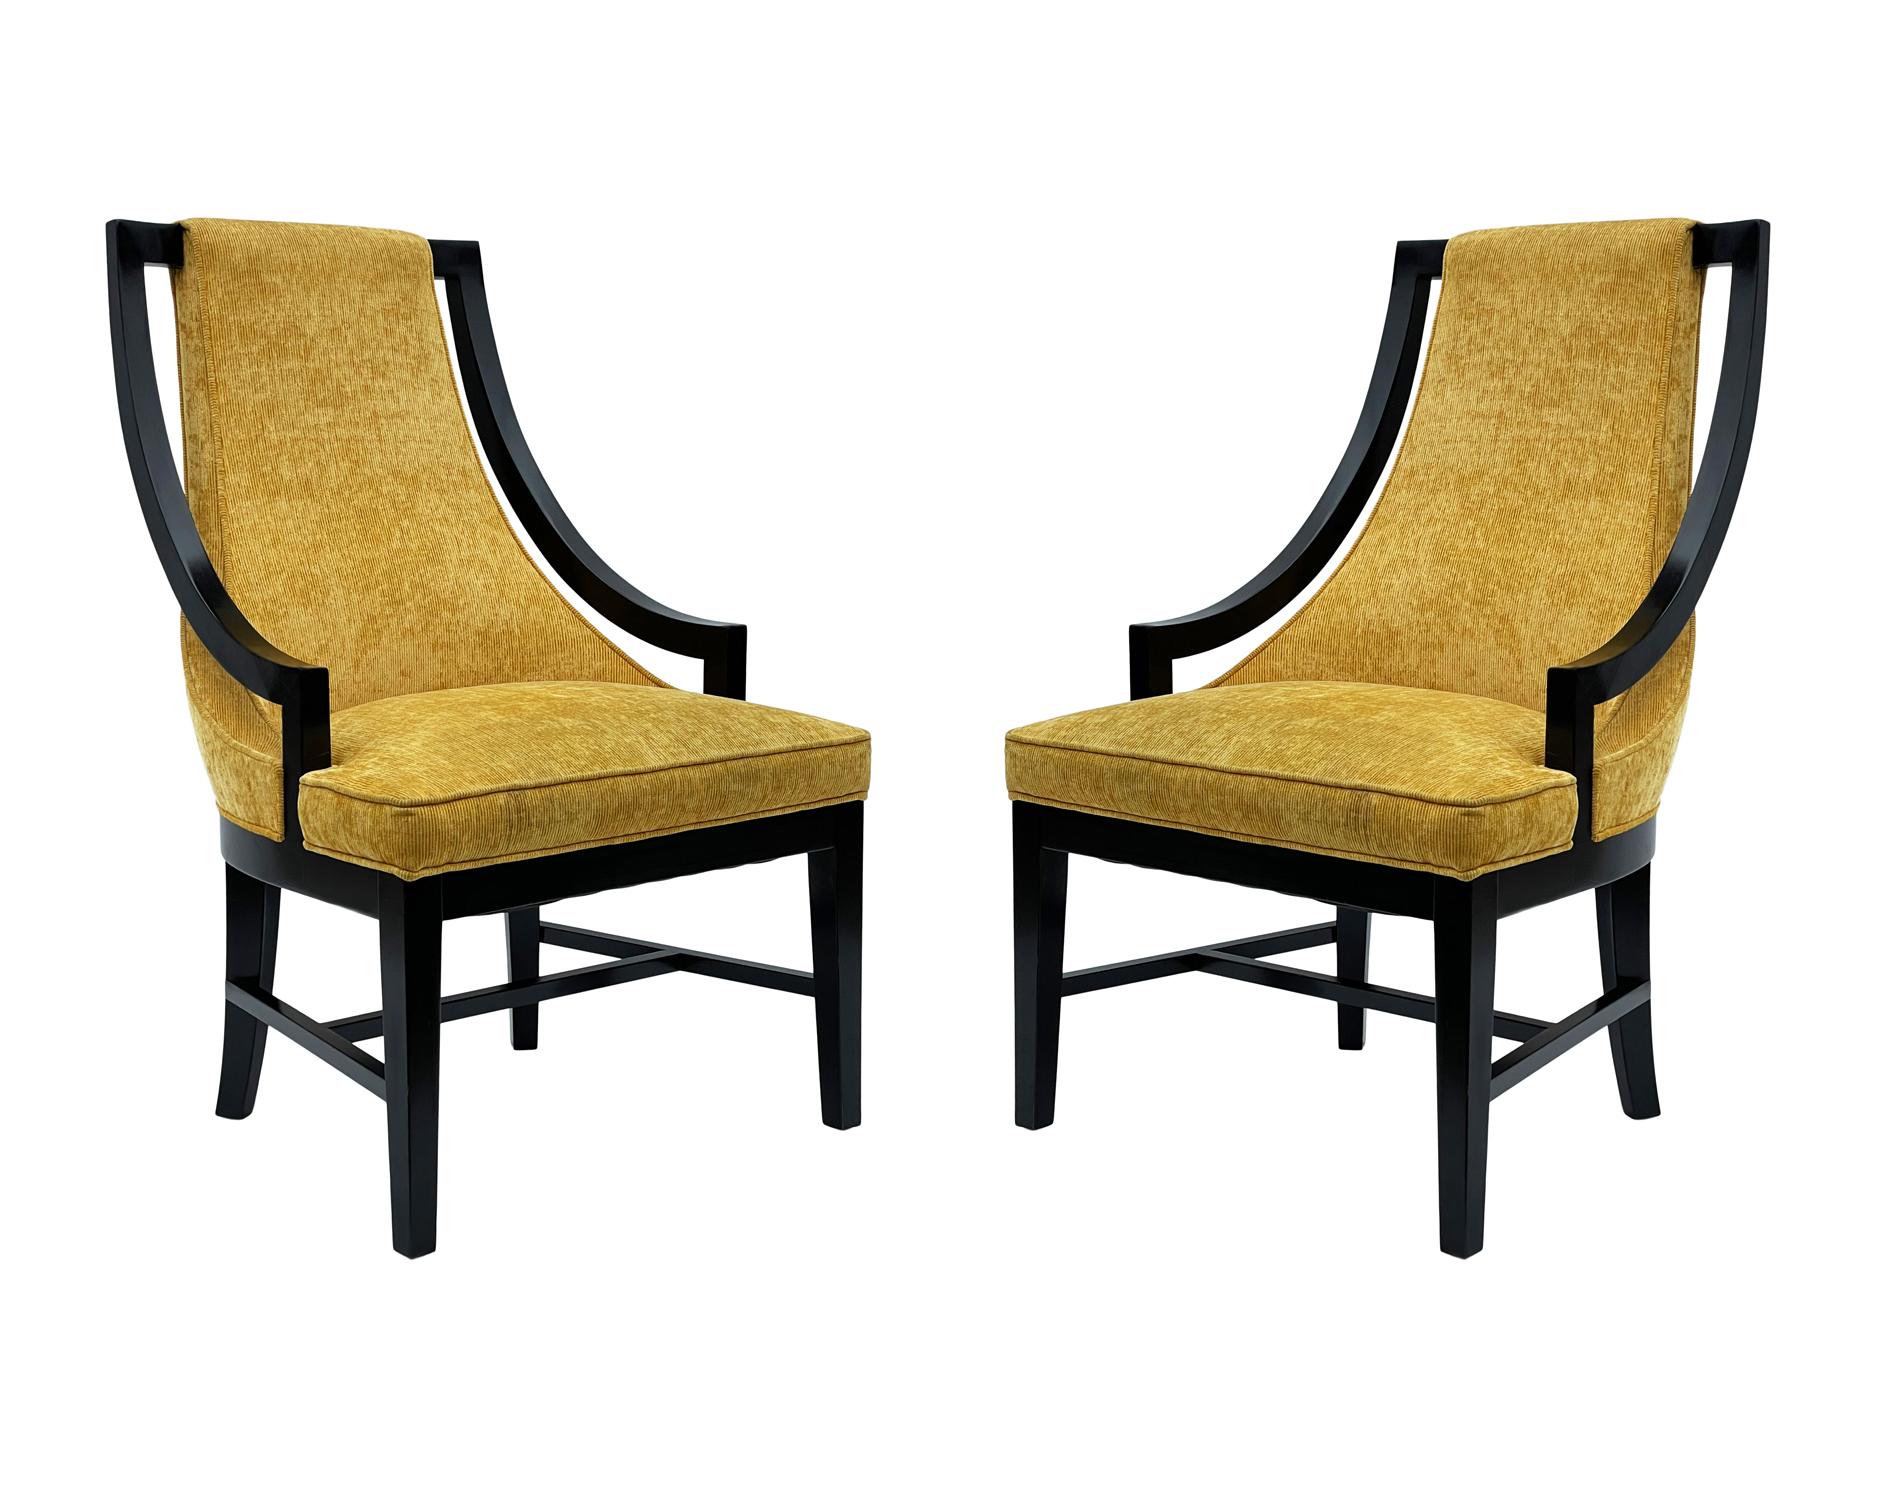 Pair of Hollywood Regency Black Frame Armchair Slipper Chairs with Gold Fabric For Sale 2